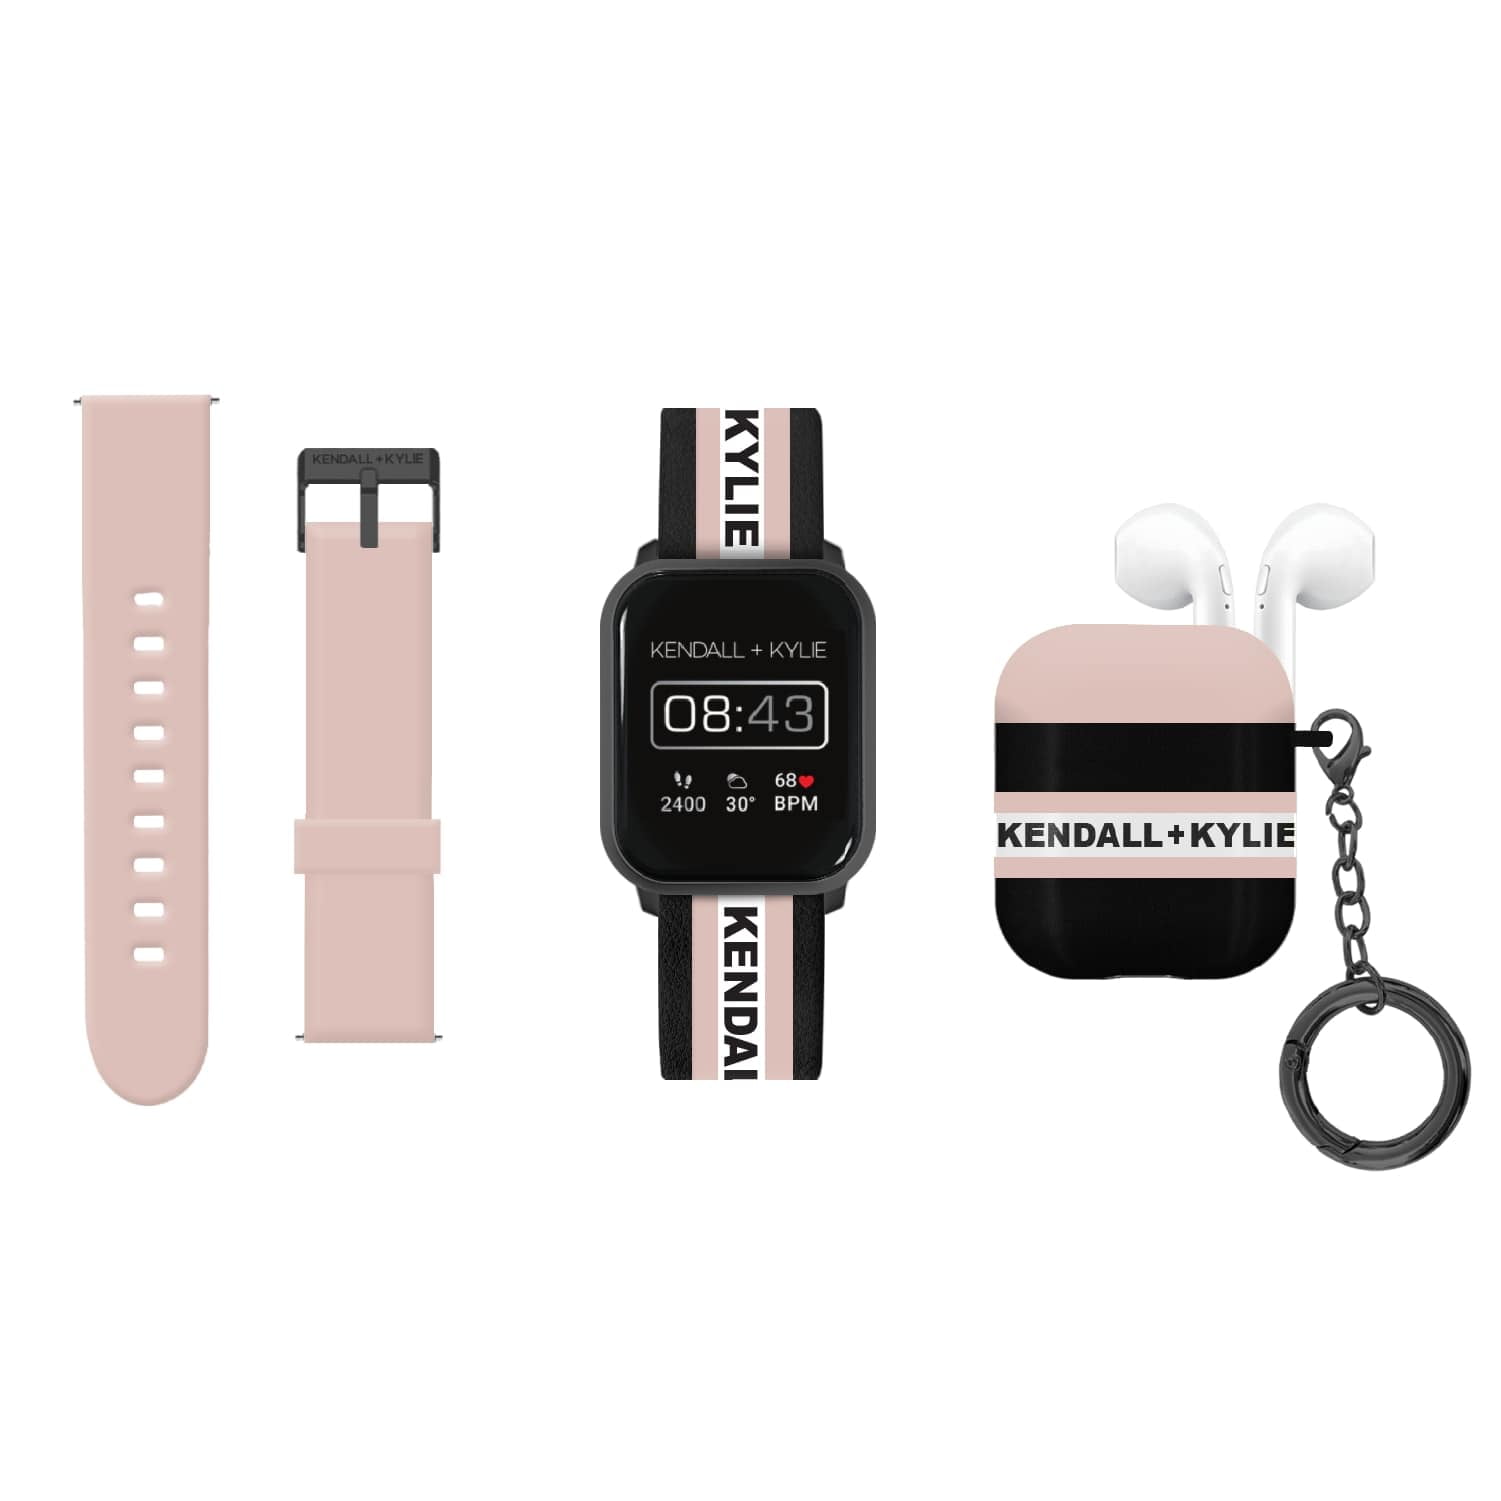 Kendall + Kylie Blush/Black Smart Watch with Interchangeable Strap and Earbud Set 900263B-40-G12